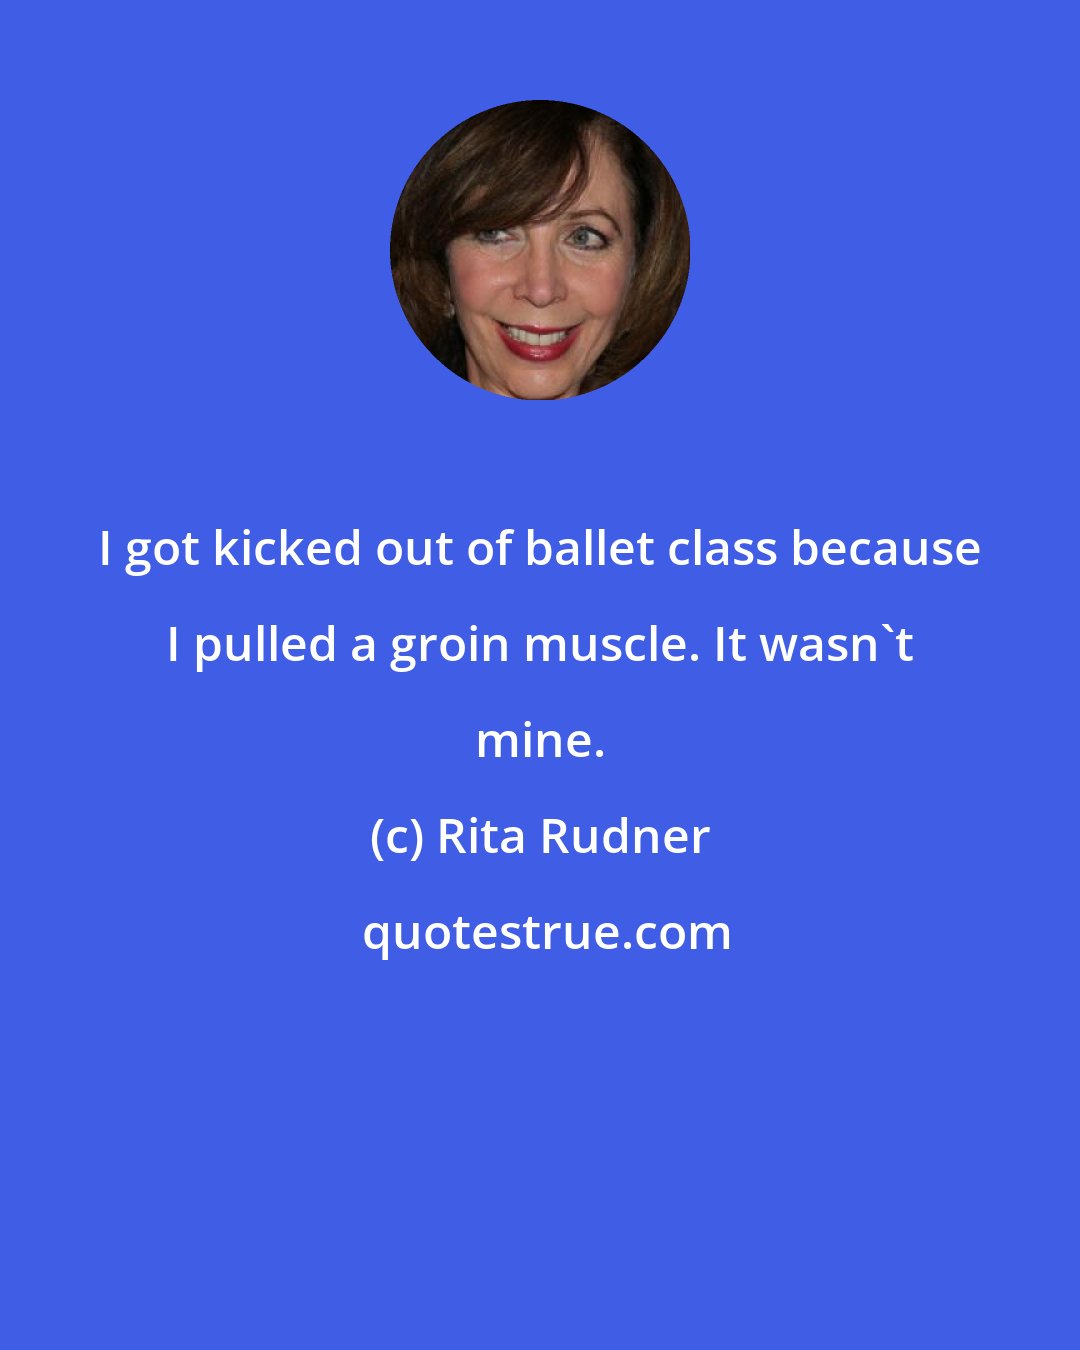 Rita Rudner: I got kicked out of ballet class because I pulled a groin muscle. It wasn't mine.